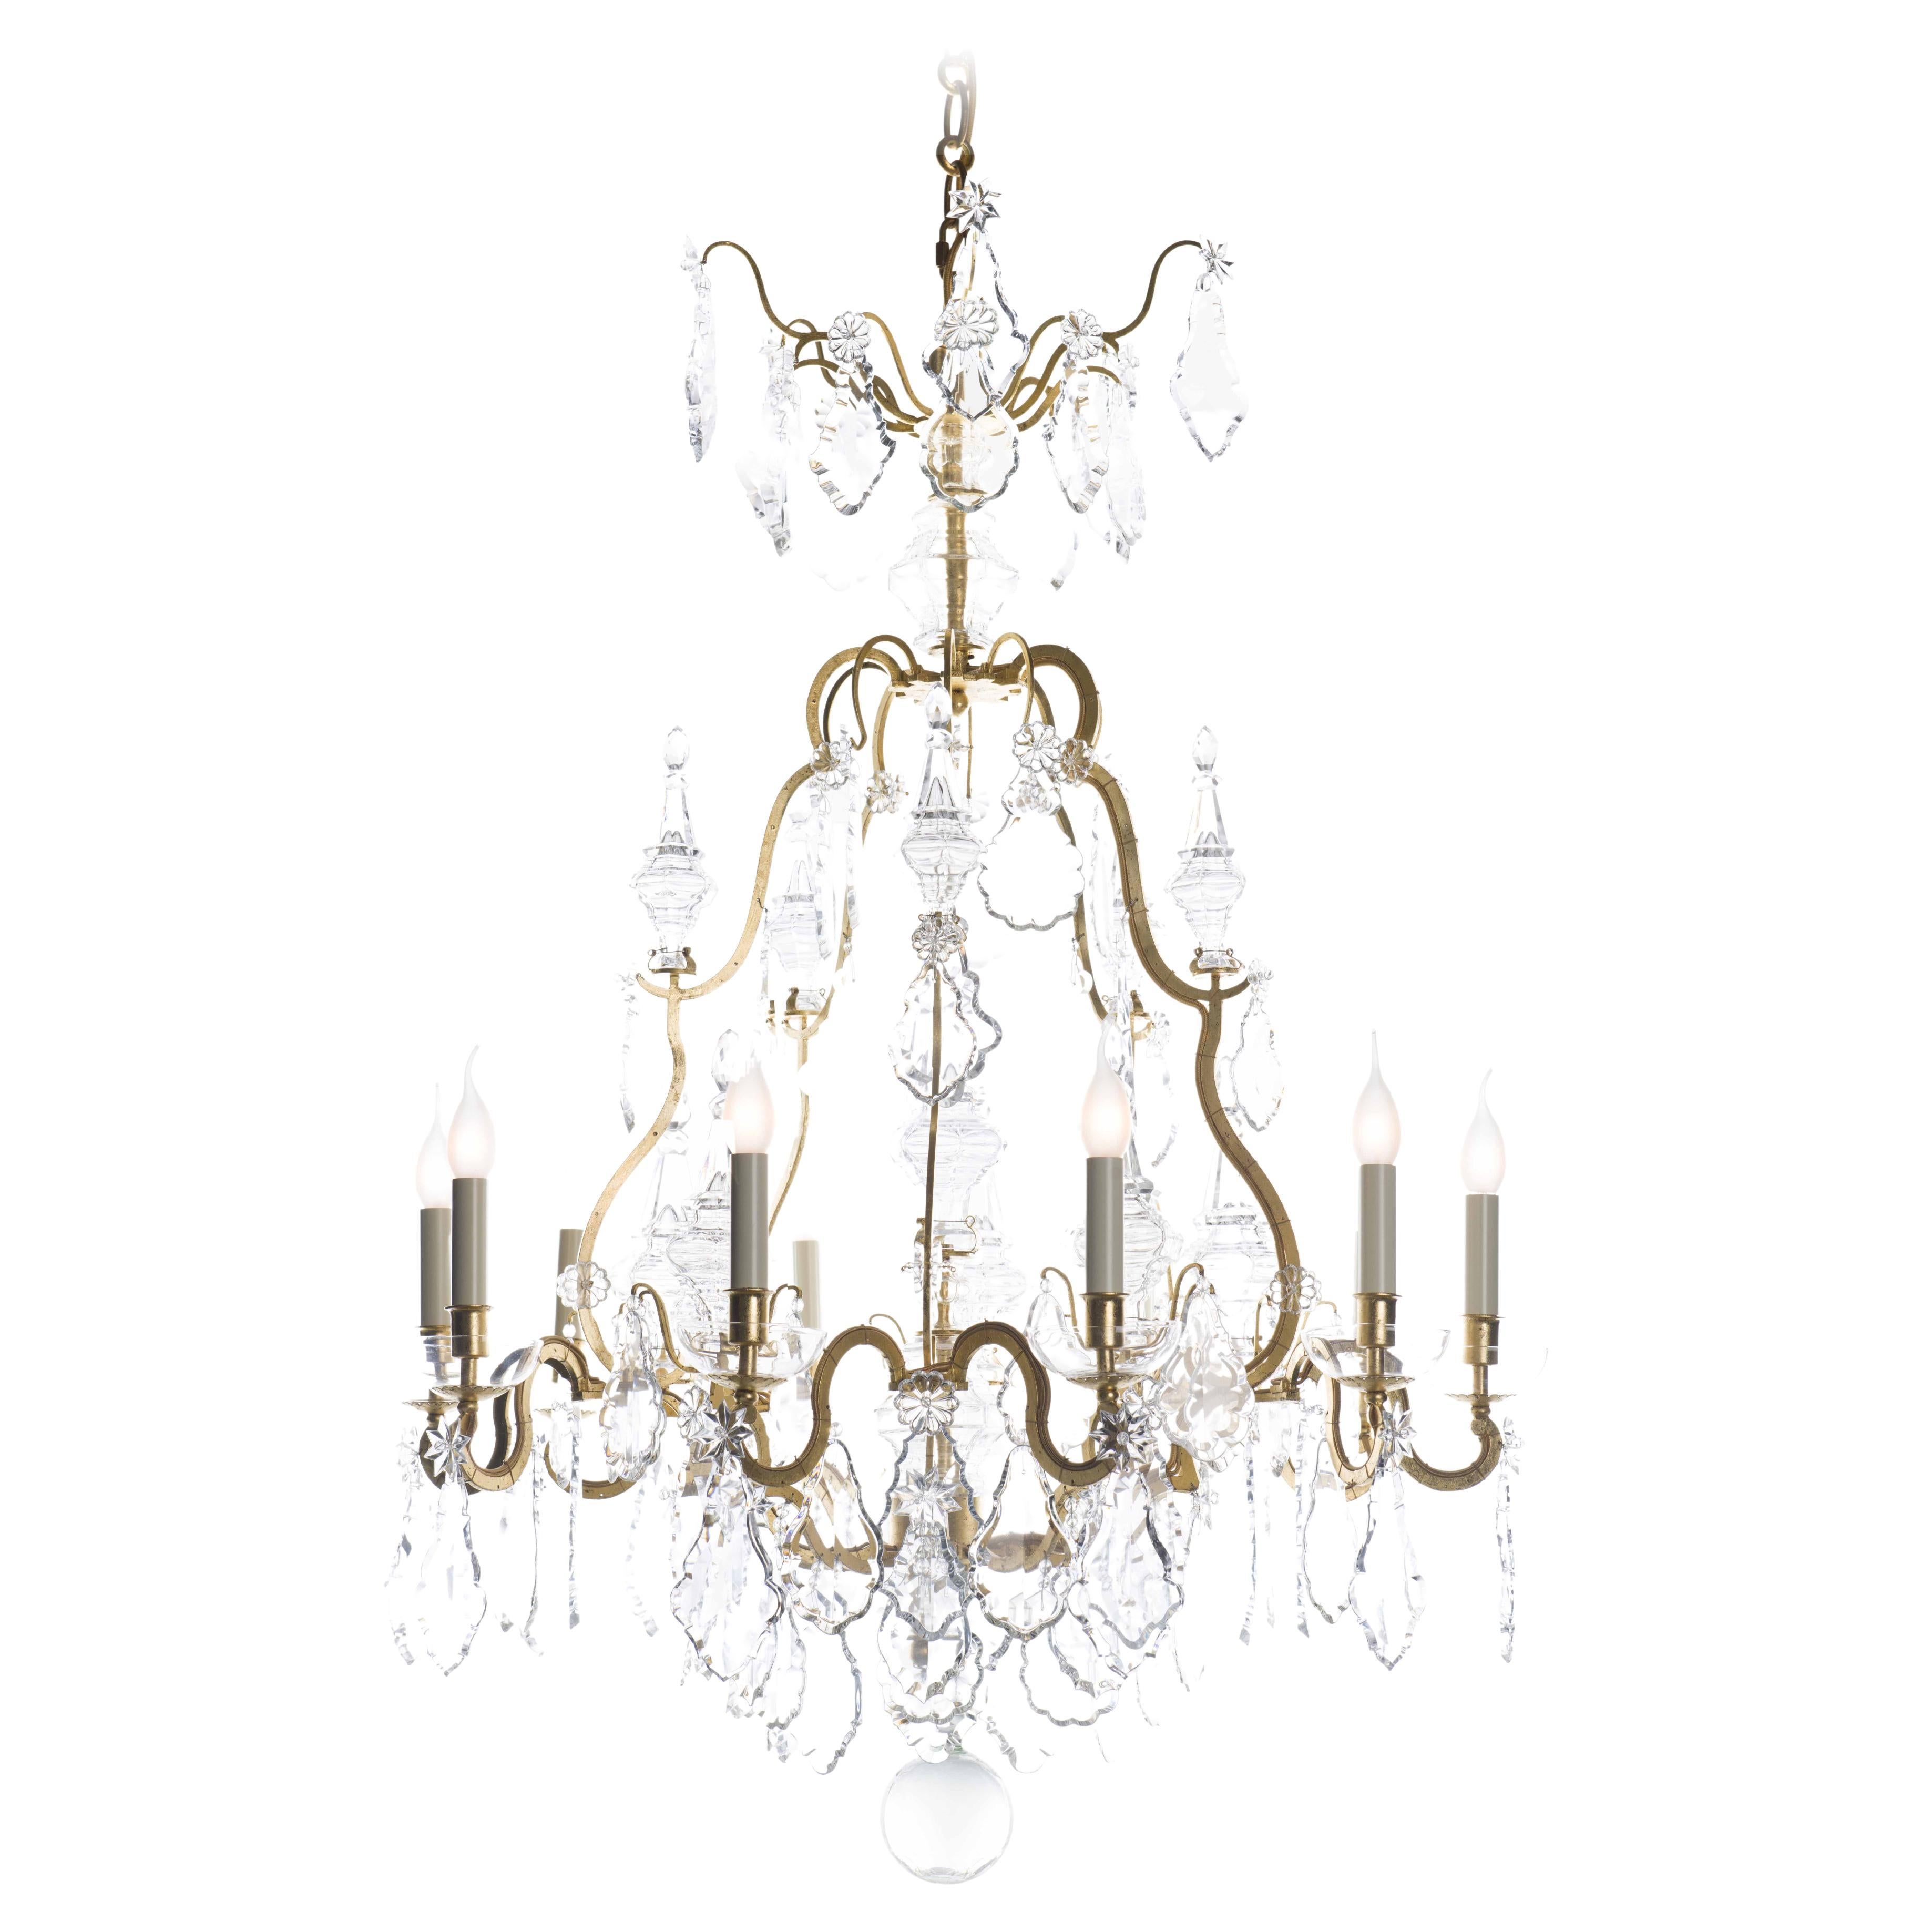 Certified Maison Bagues Chandelier, 10 Lights Iron & Crystal #10231 For Sale